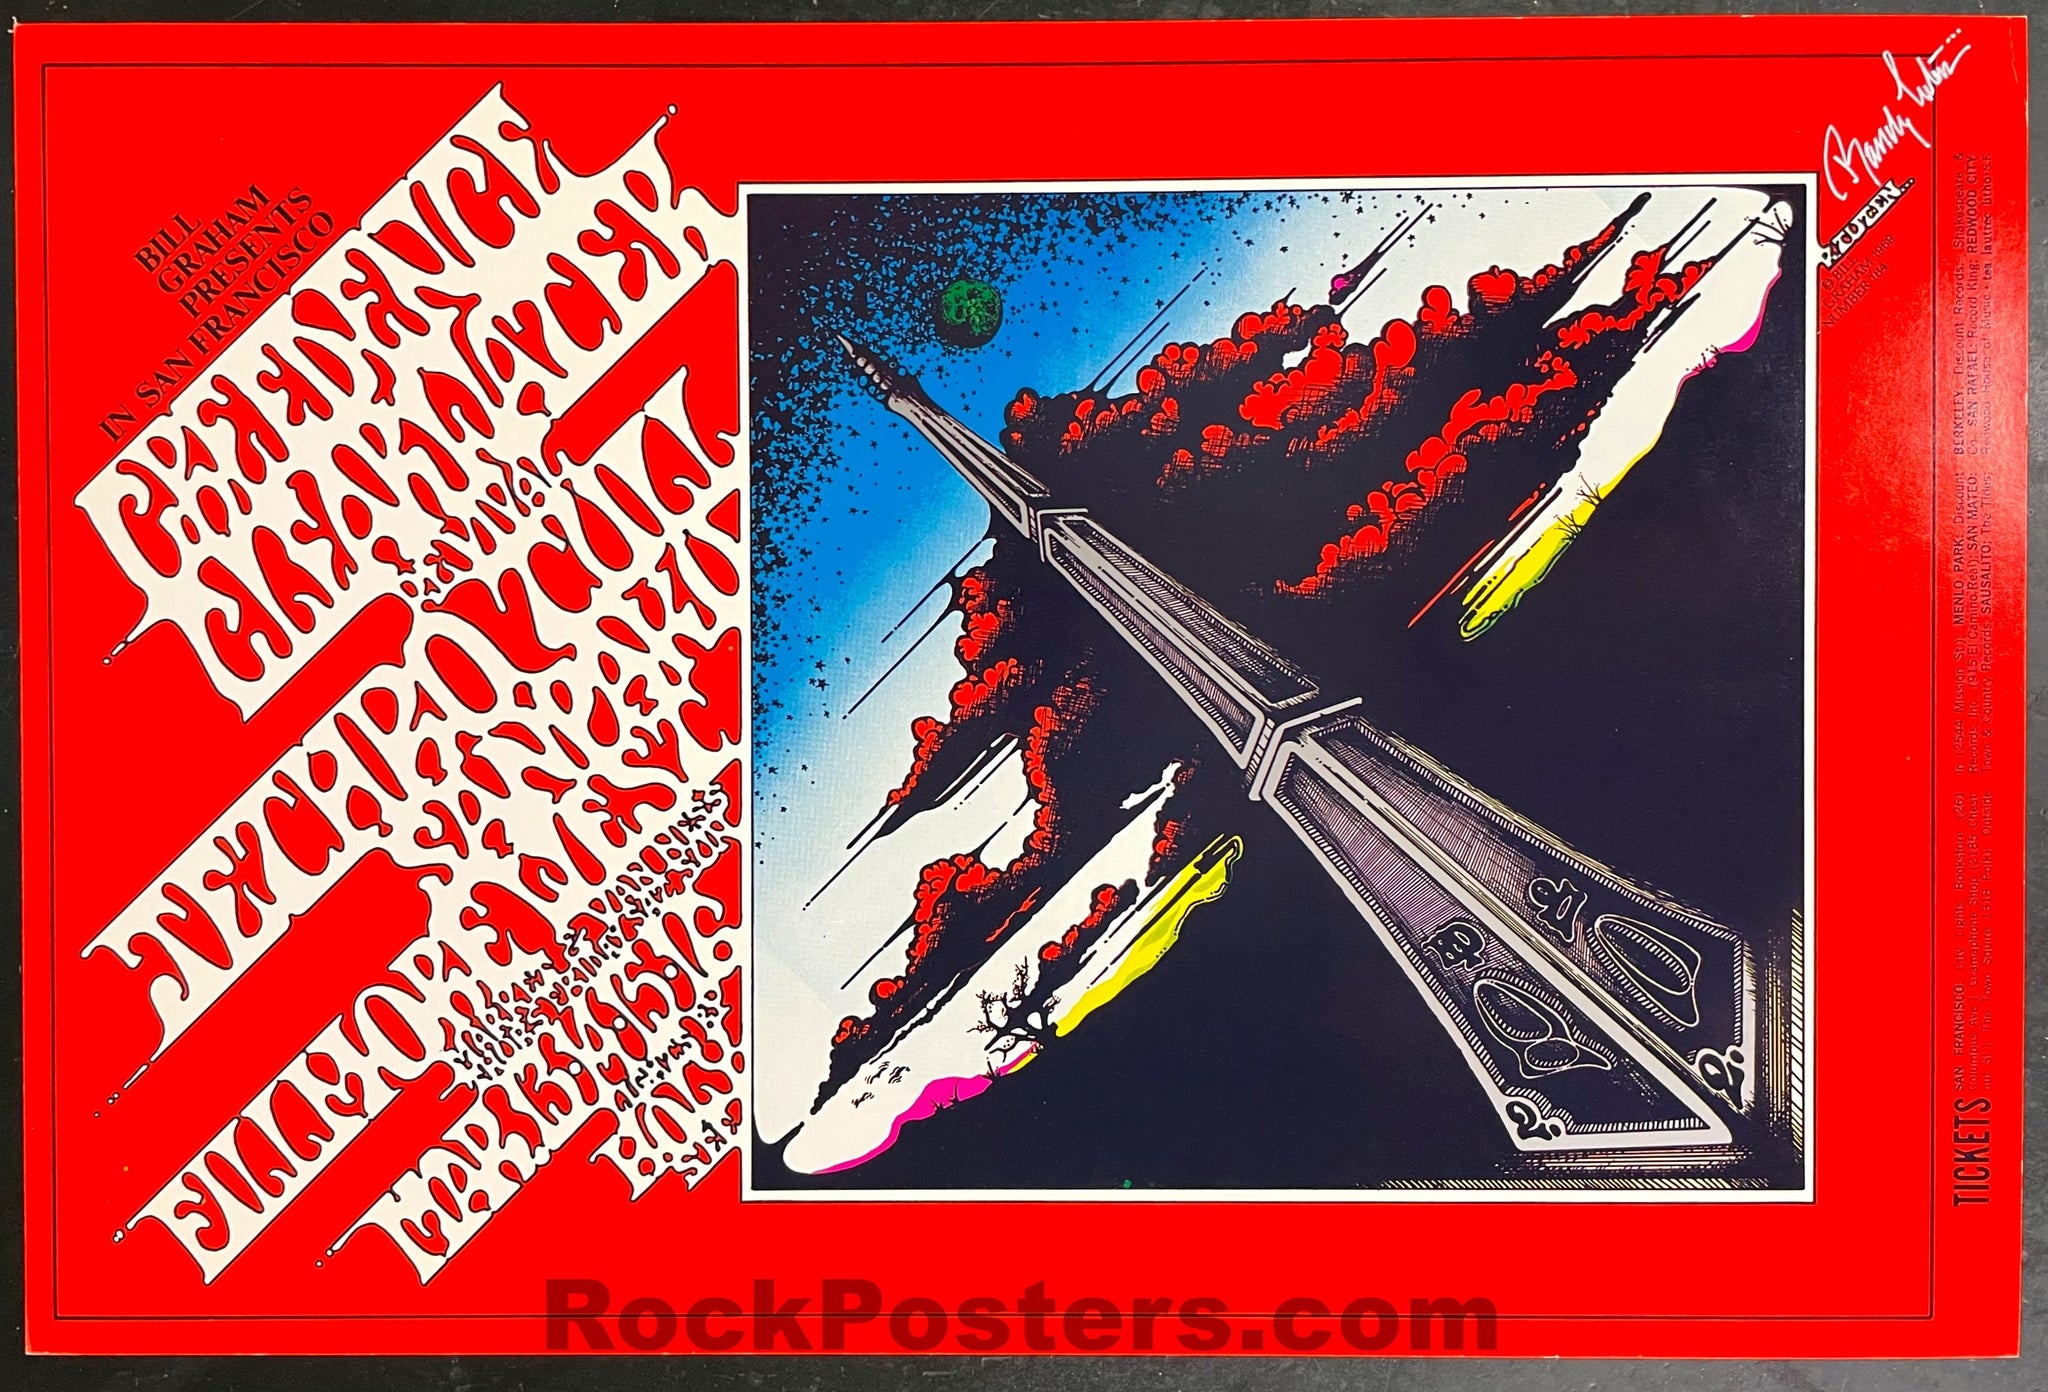 AUCTION - BG-164 - Creedence Clearwater - Randy Tuten Signed - 1969 Poster - Fillmore West - Near Mint Minus